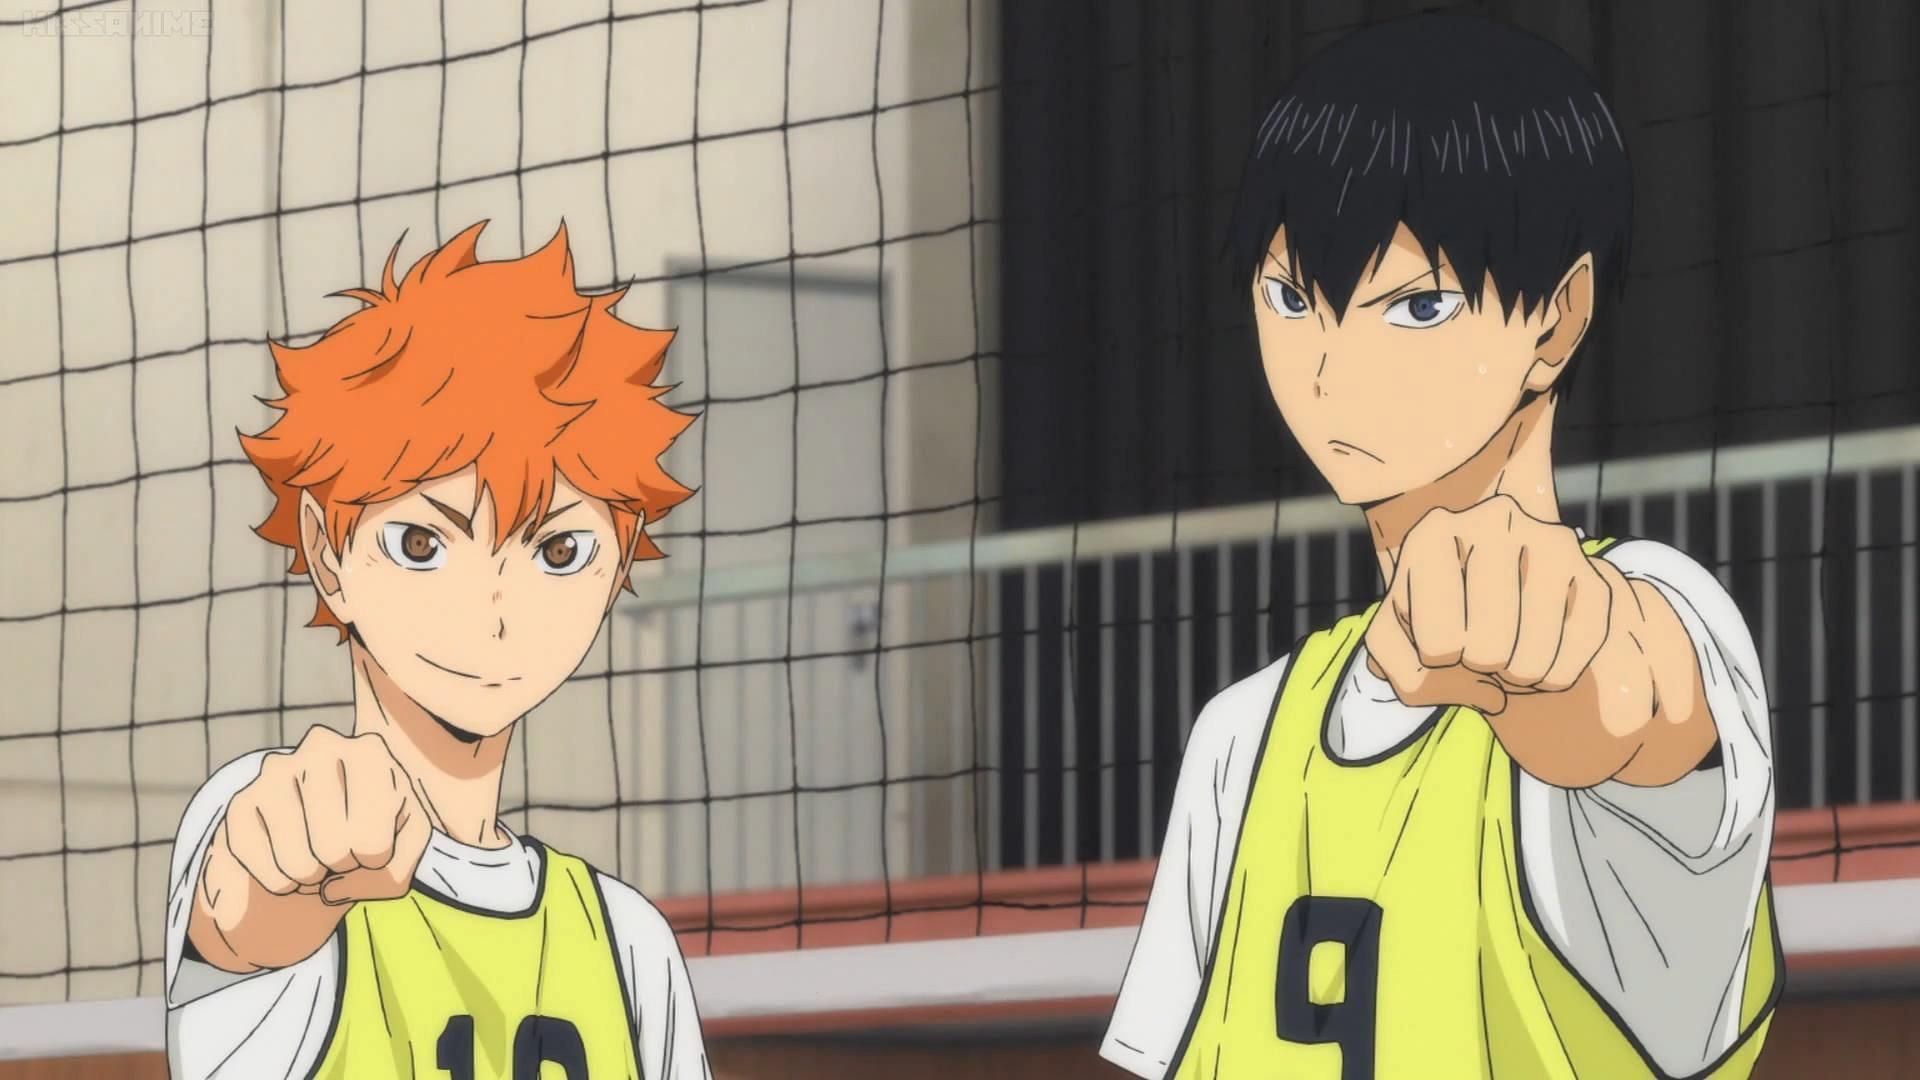 Hinata and Kageyama as seen in the anime (Image via Production I.G)